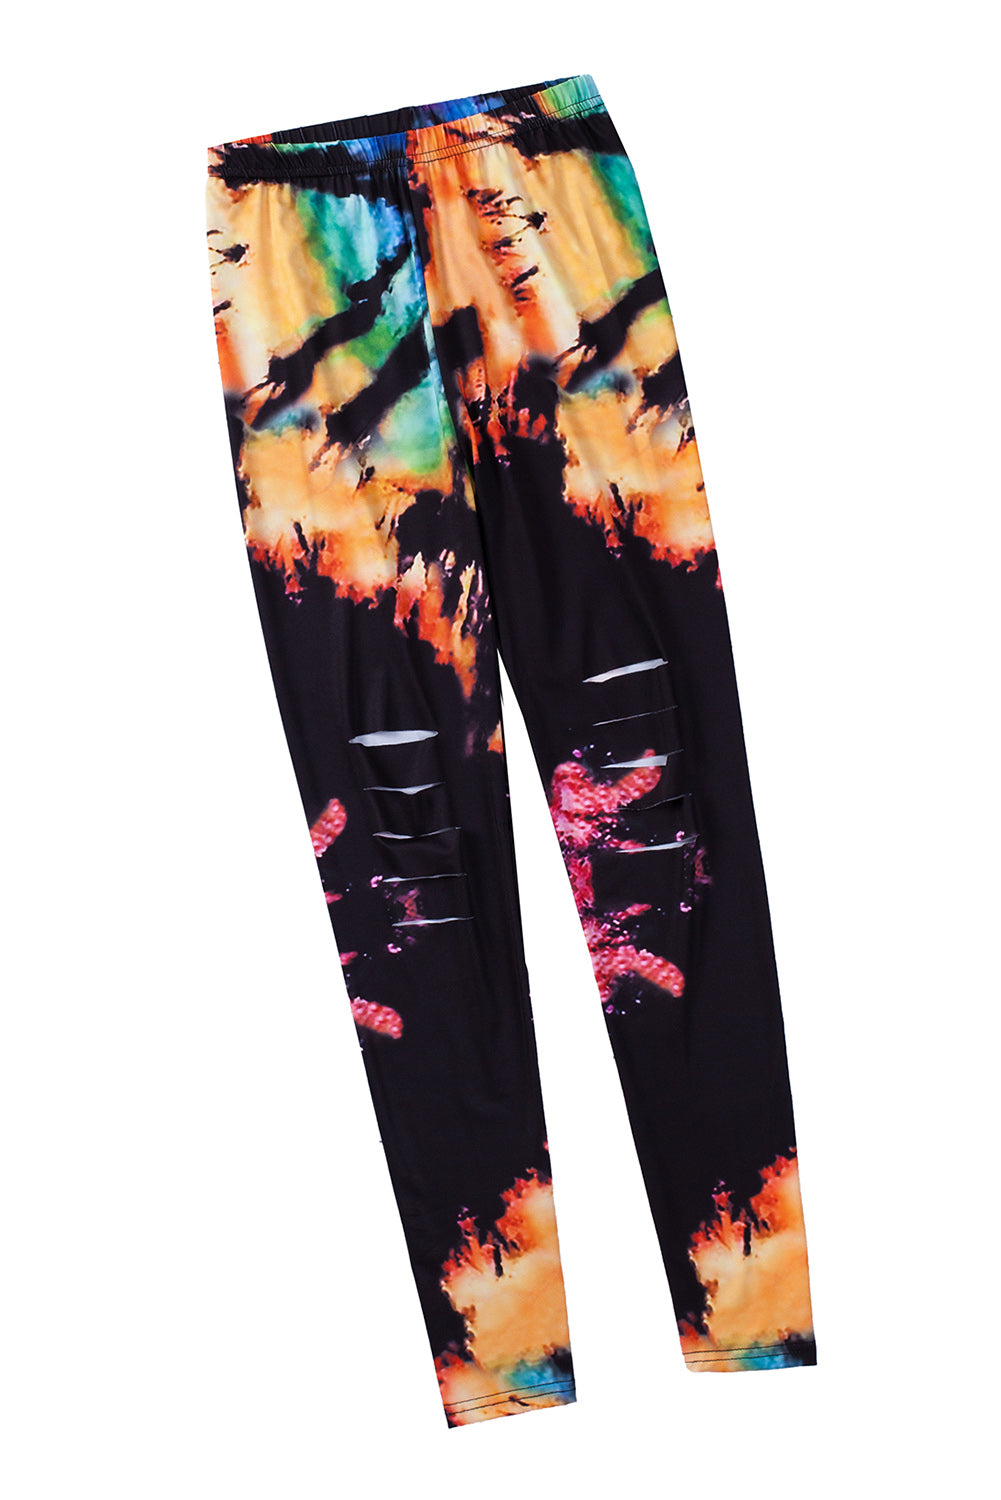 Pink Tie Dye Hollow Out Fitness Activewear pajkice